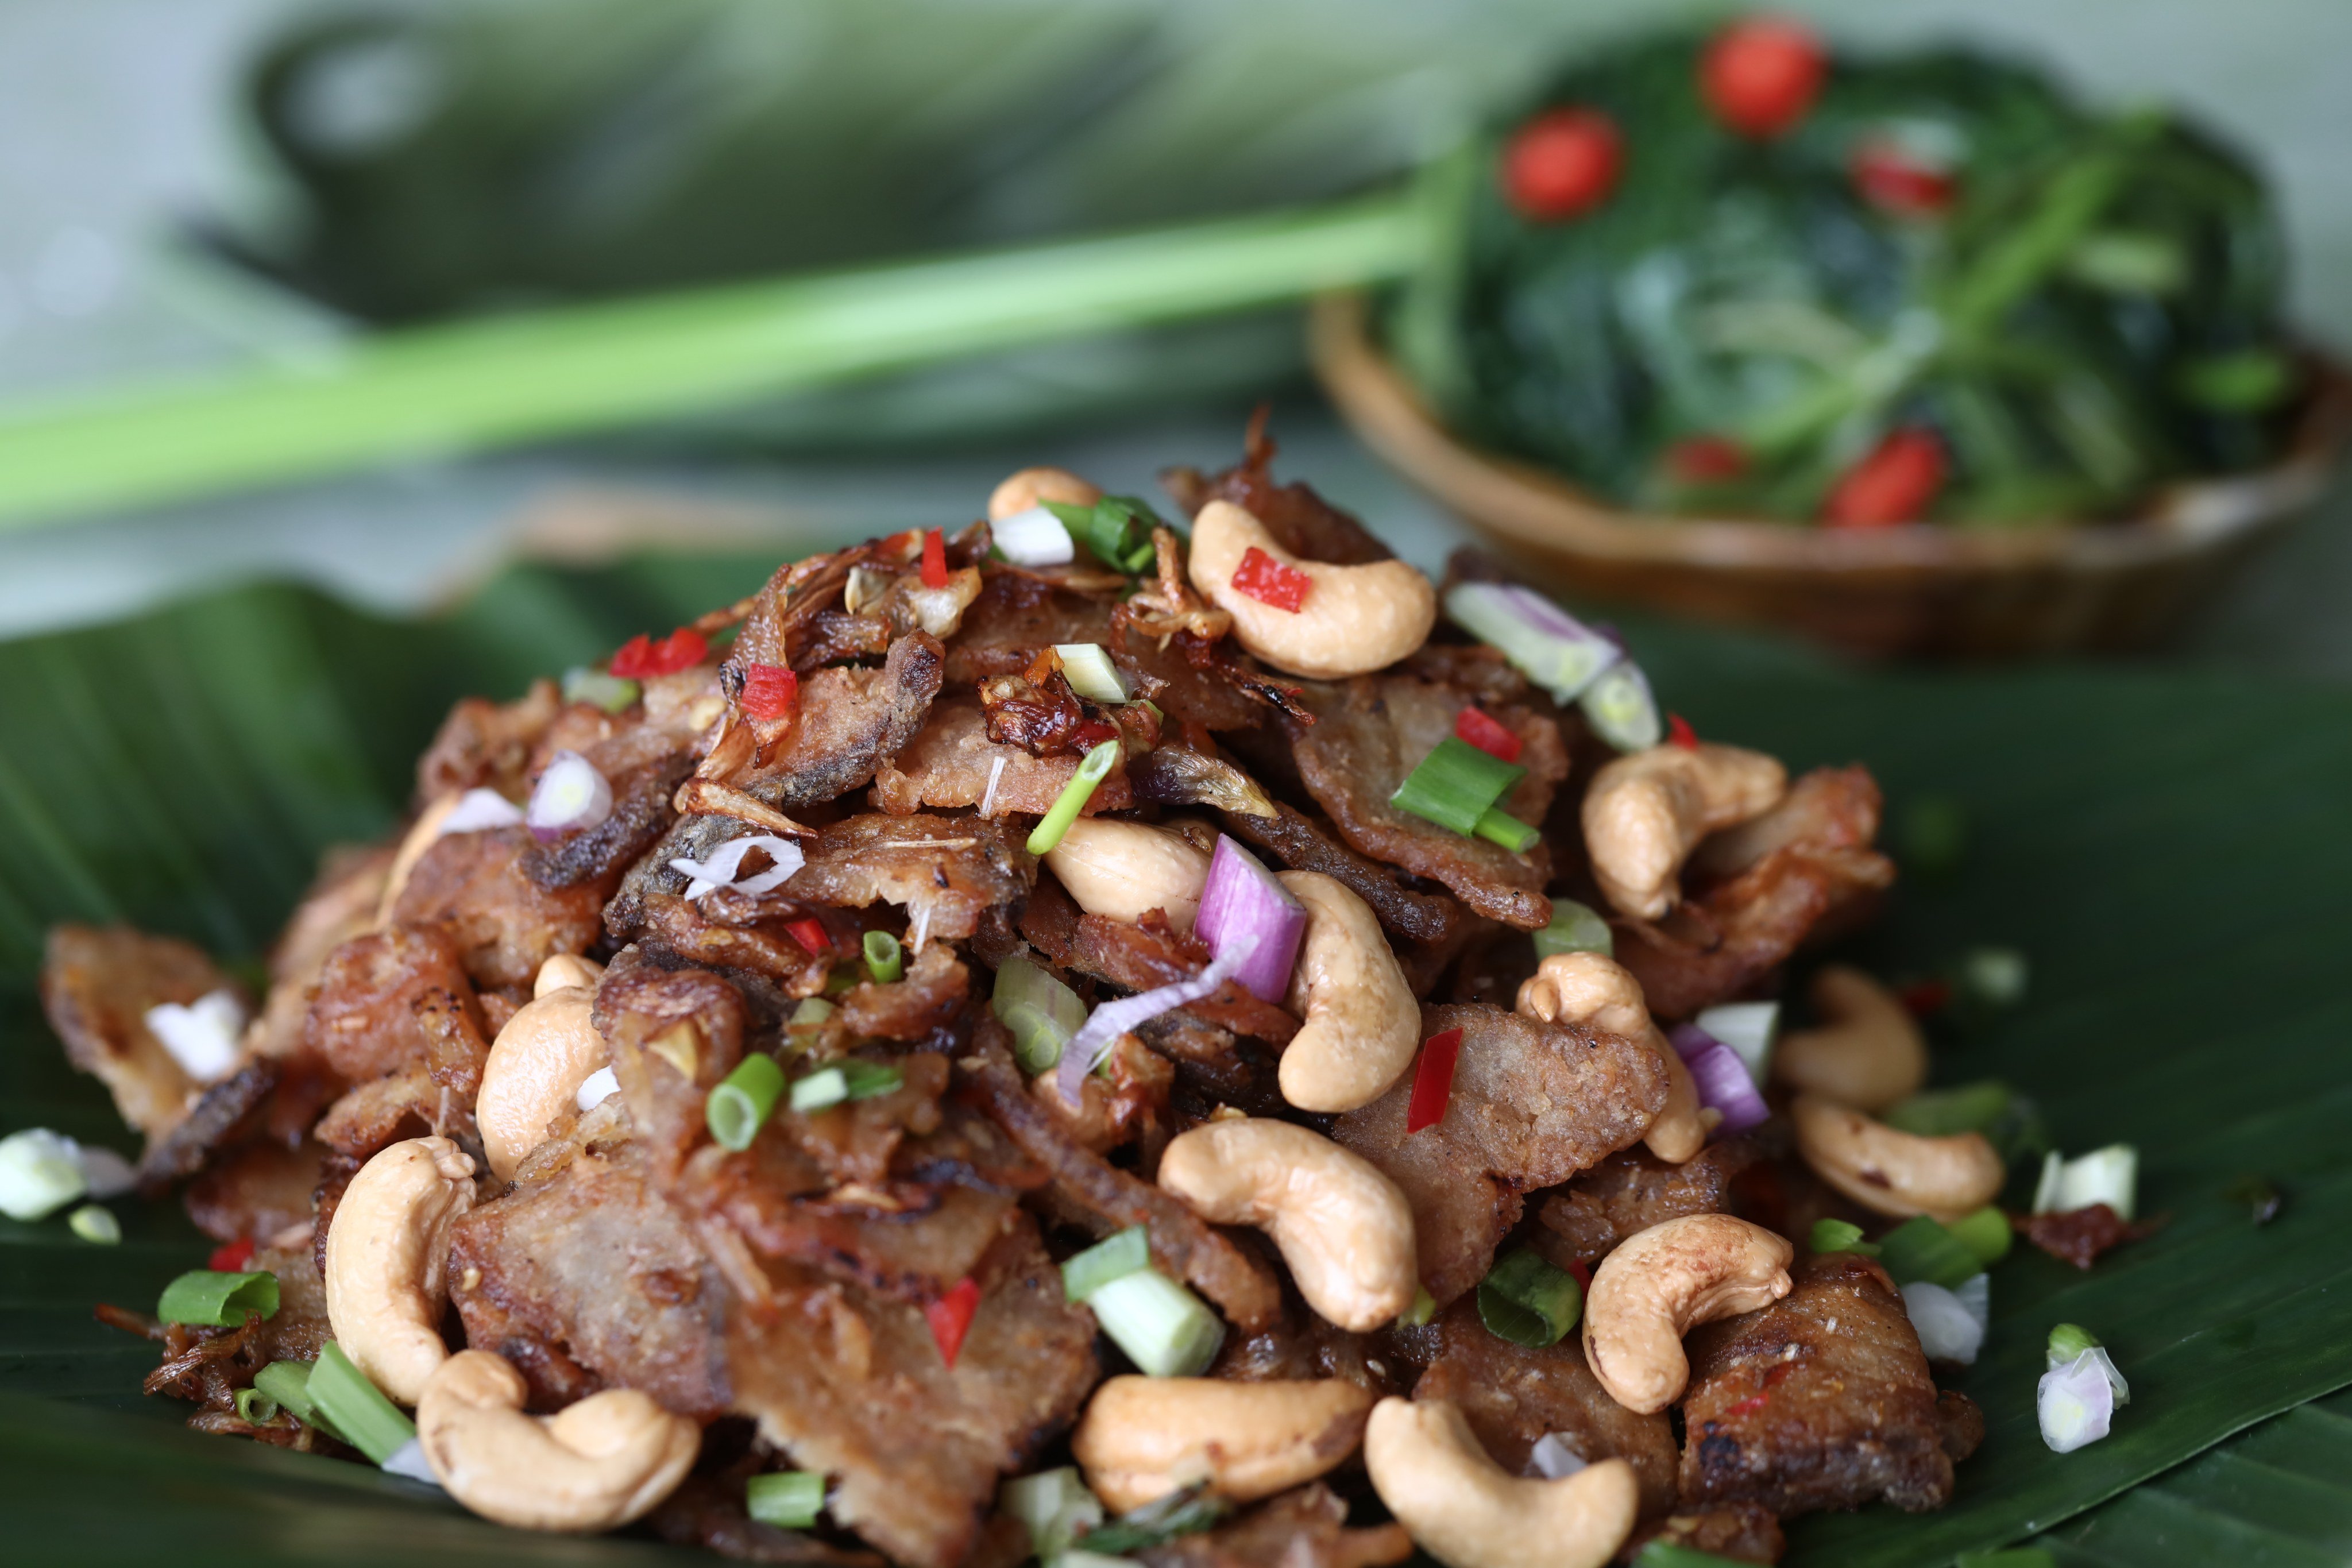 Thai crunchy fish. There is nothing left on the serving platter when Susan Jung serves this dish at home. Photo: SCMP/Jonathan Wong